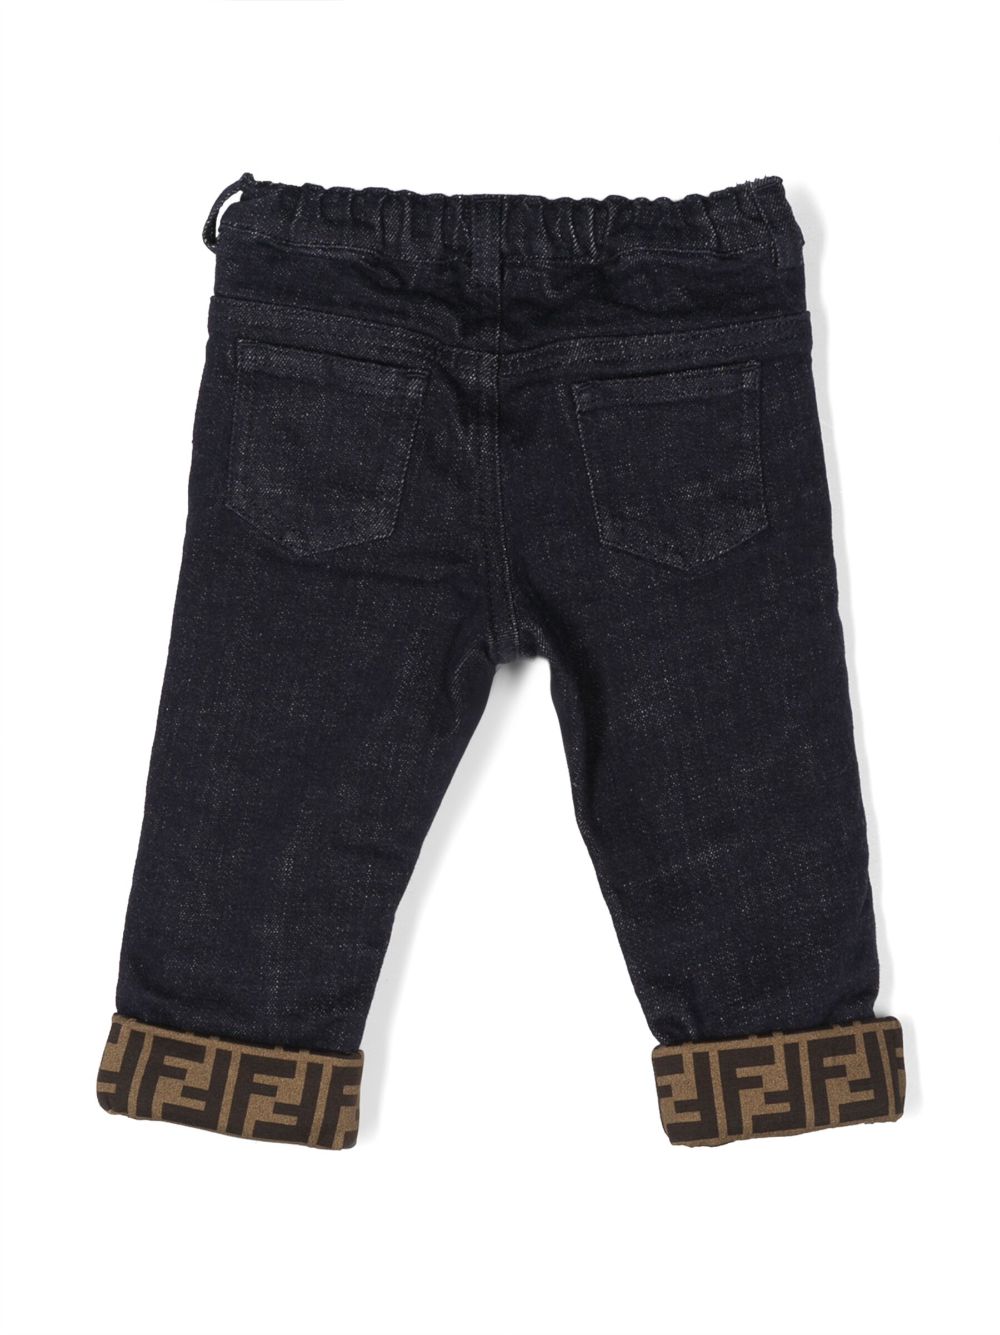 Midnight blue jeans for newborns with logo